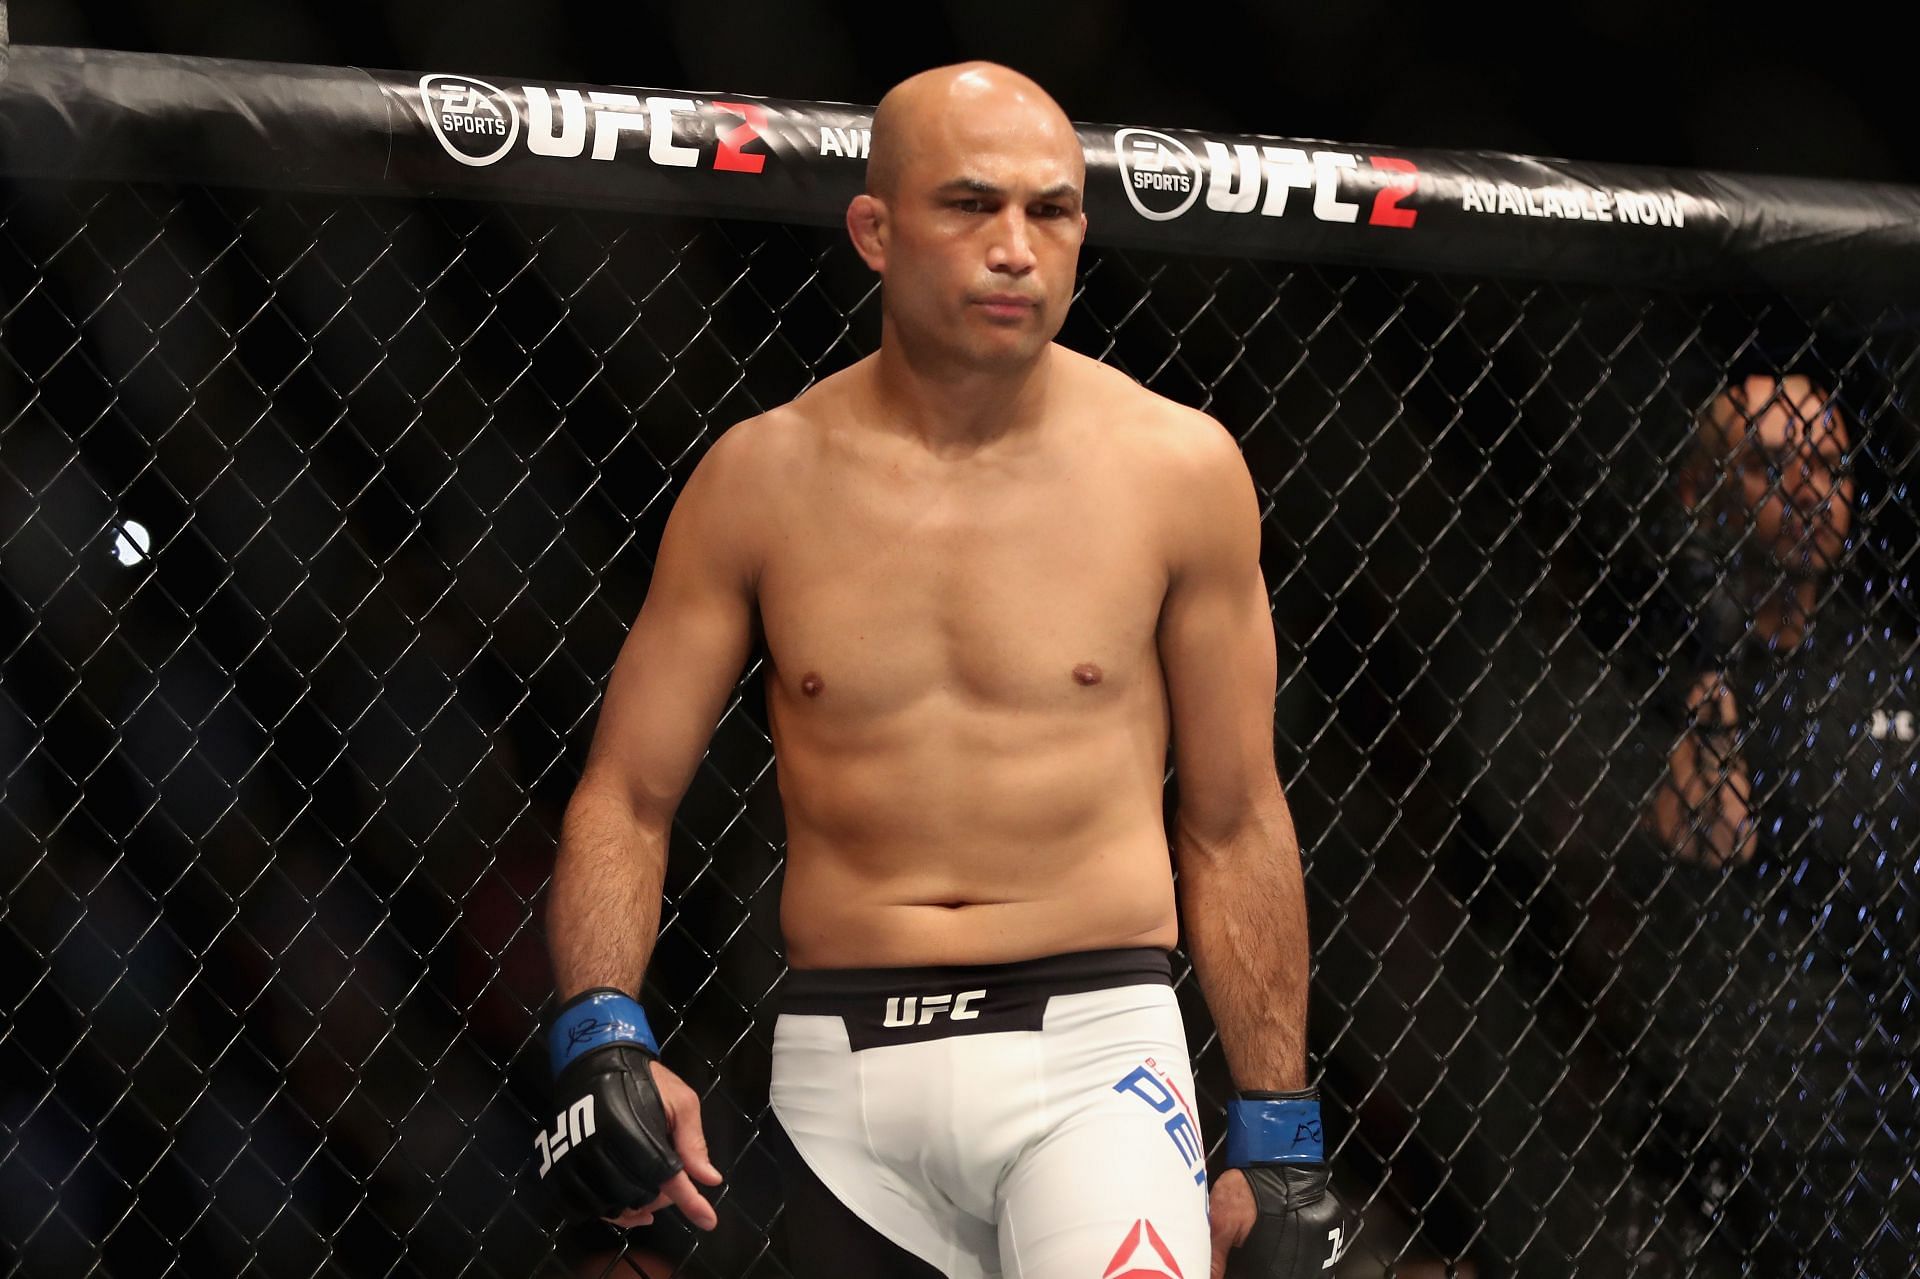 BJ Penn famously called out Georges St-Pierre in the summer of 2008, but the fight did not go well for him